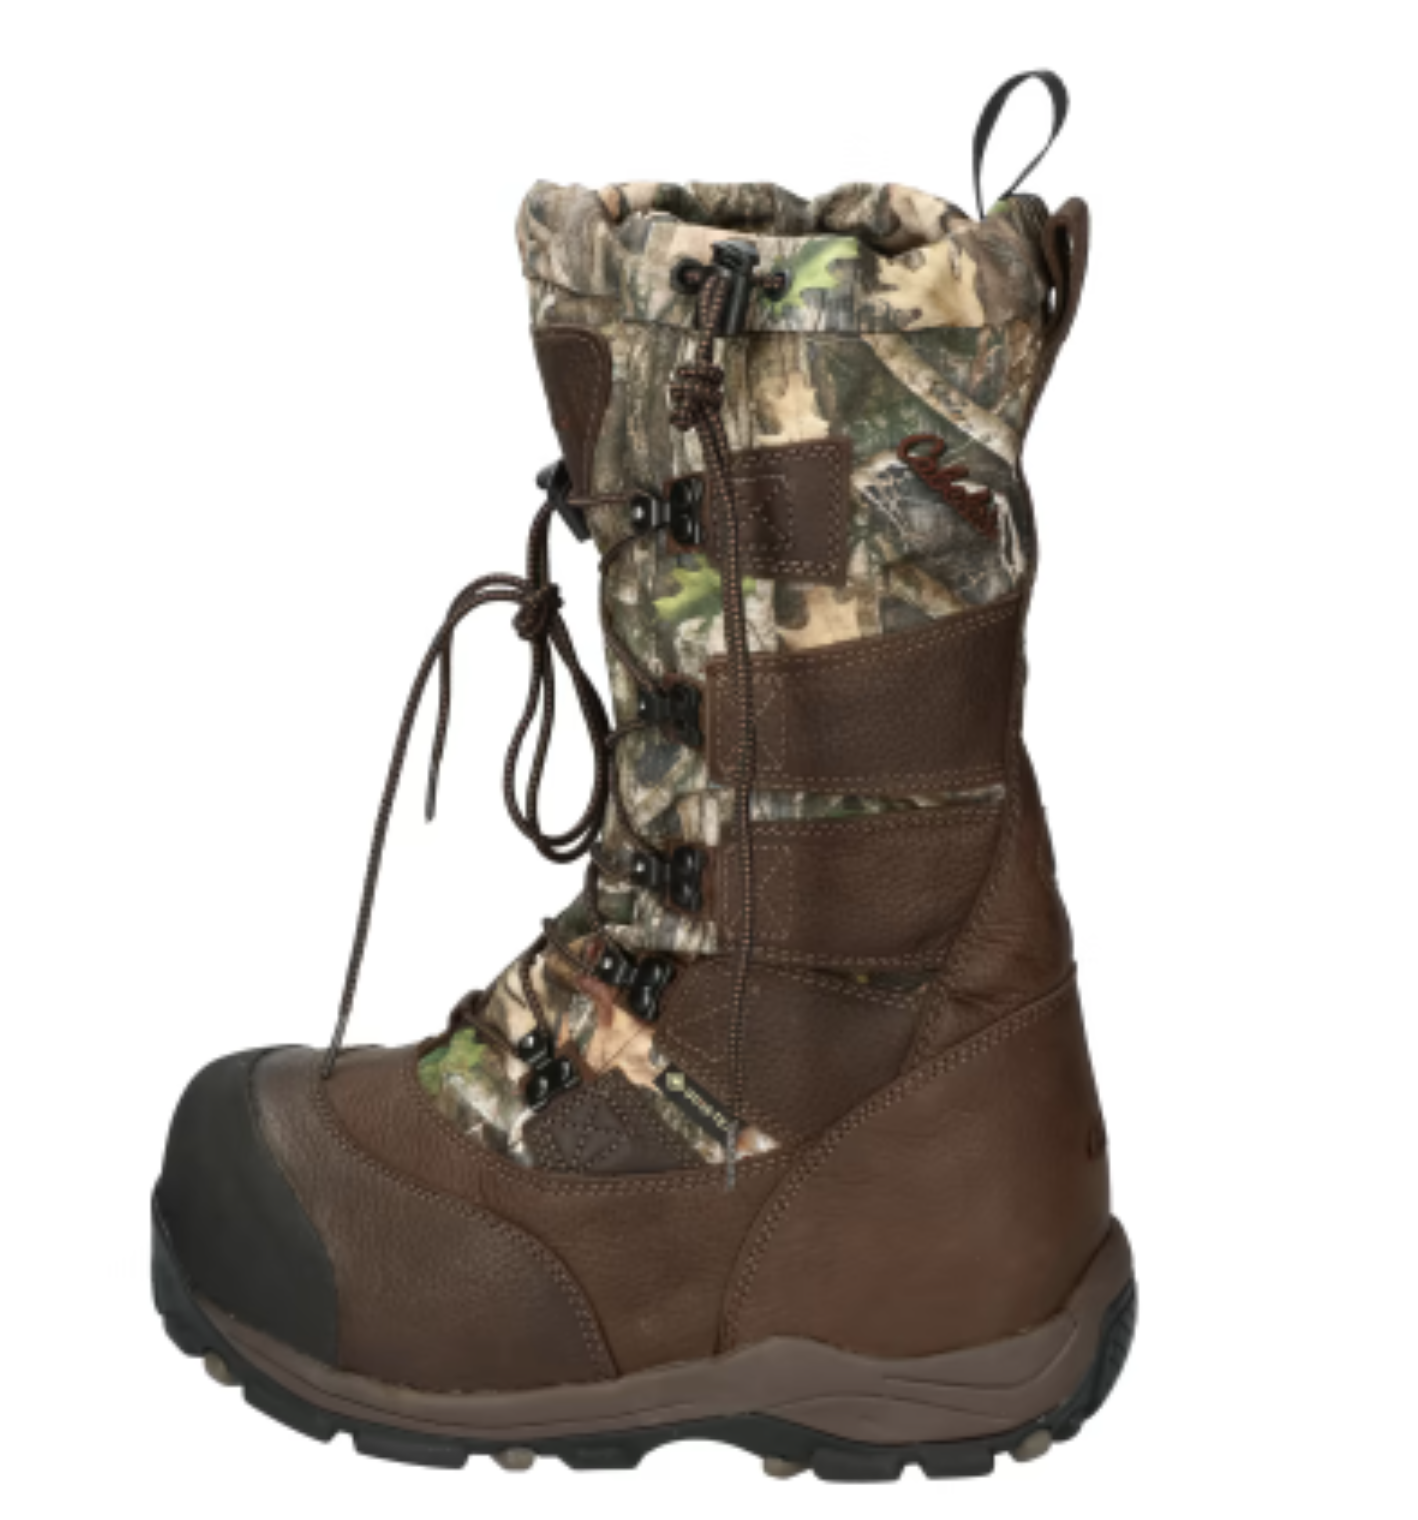 Cabela's Saskatchewan Warmest Hunting Boots For Winter and Cold Weather Huntingw with Insulation